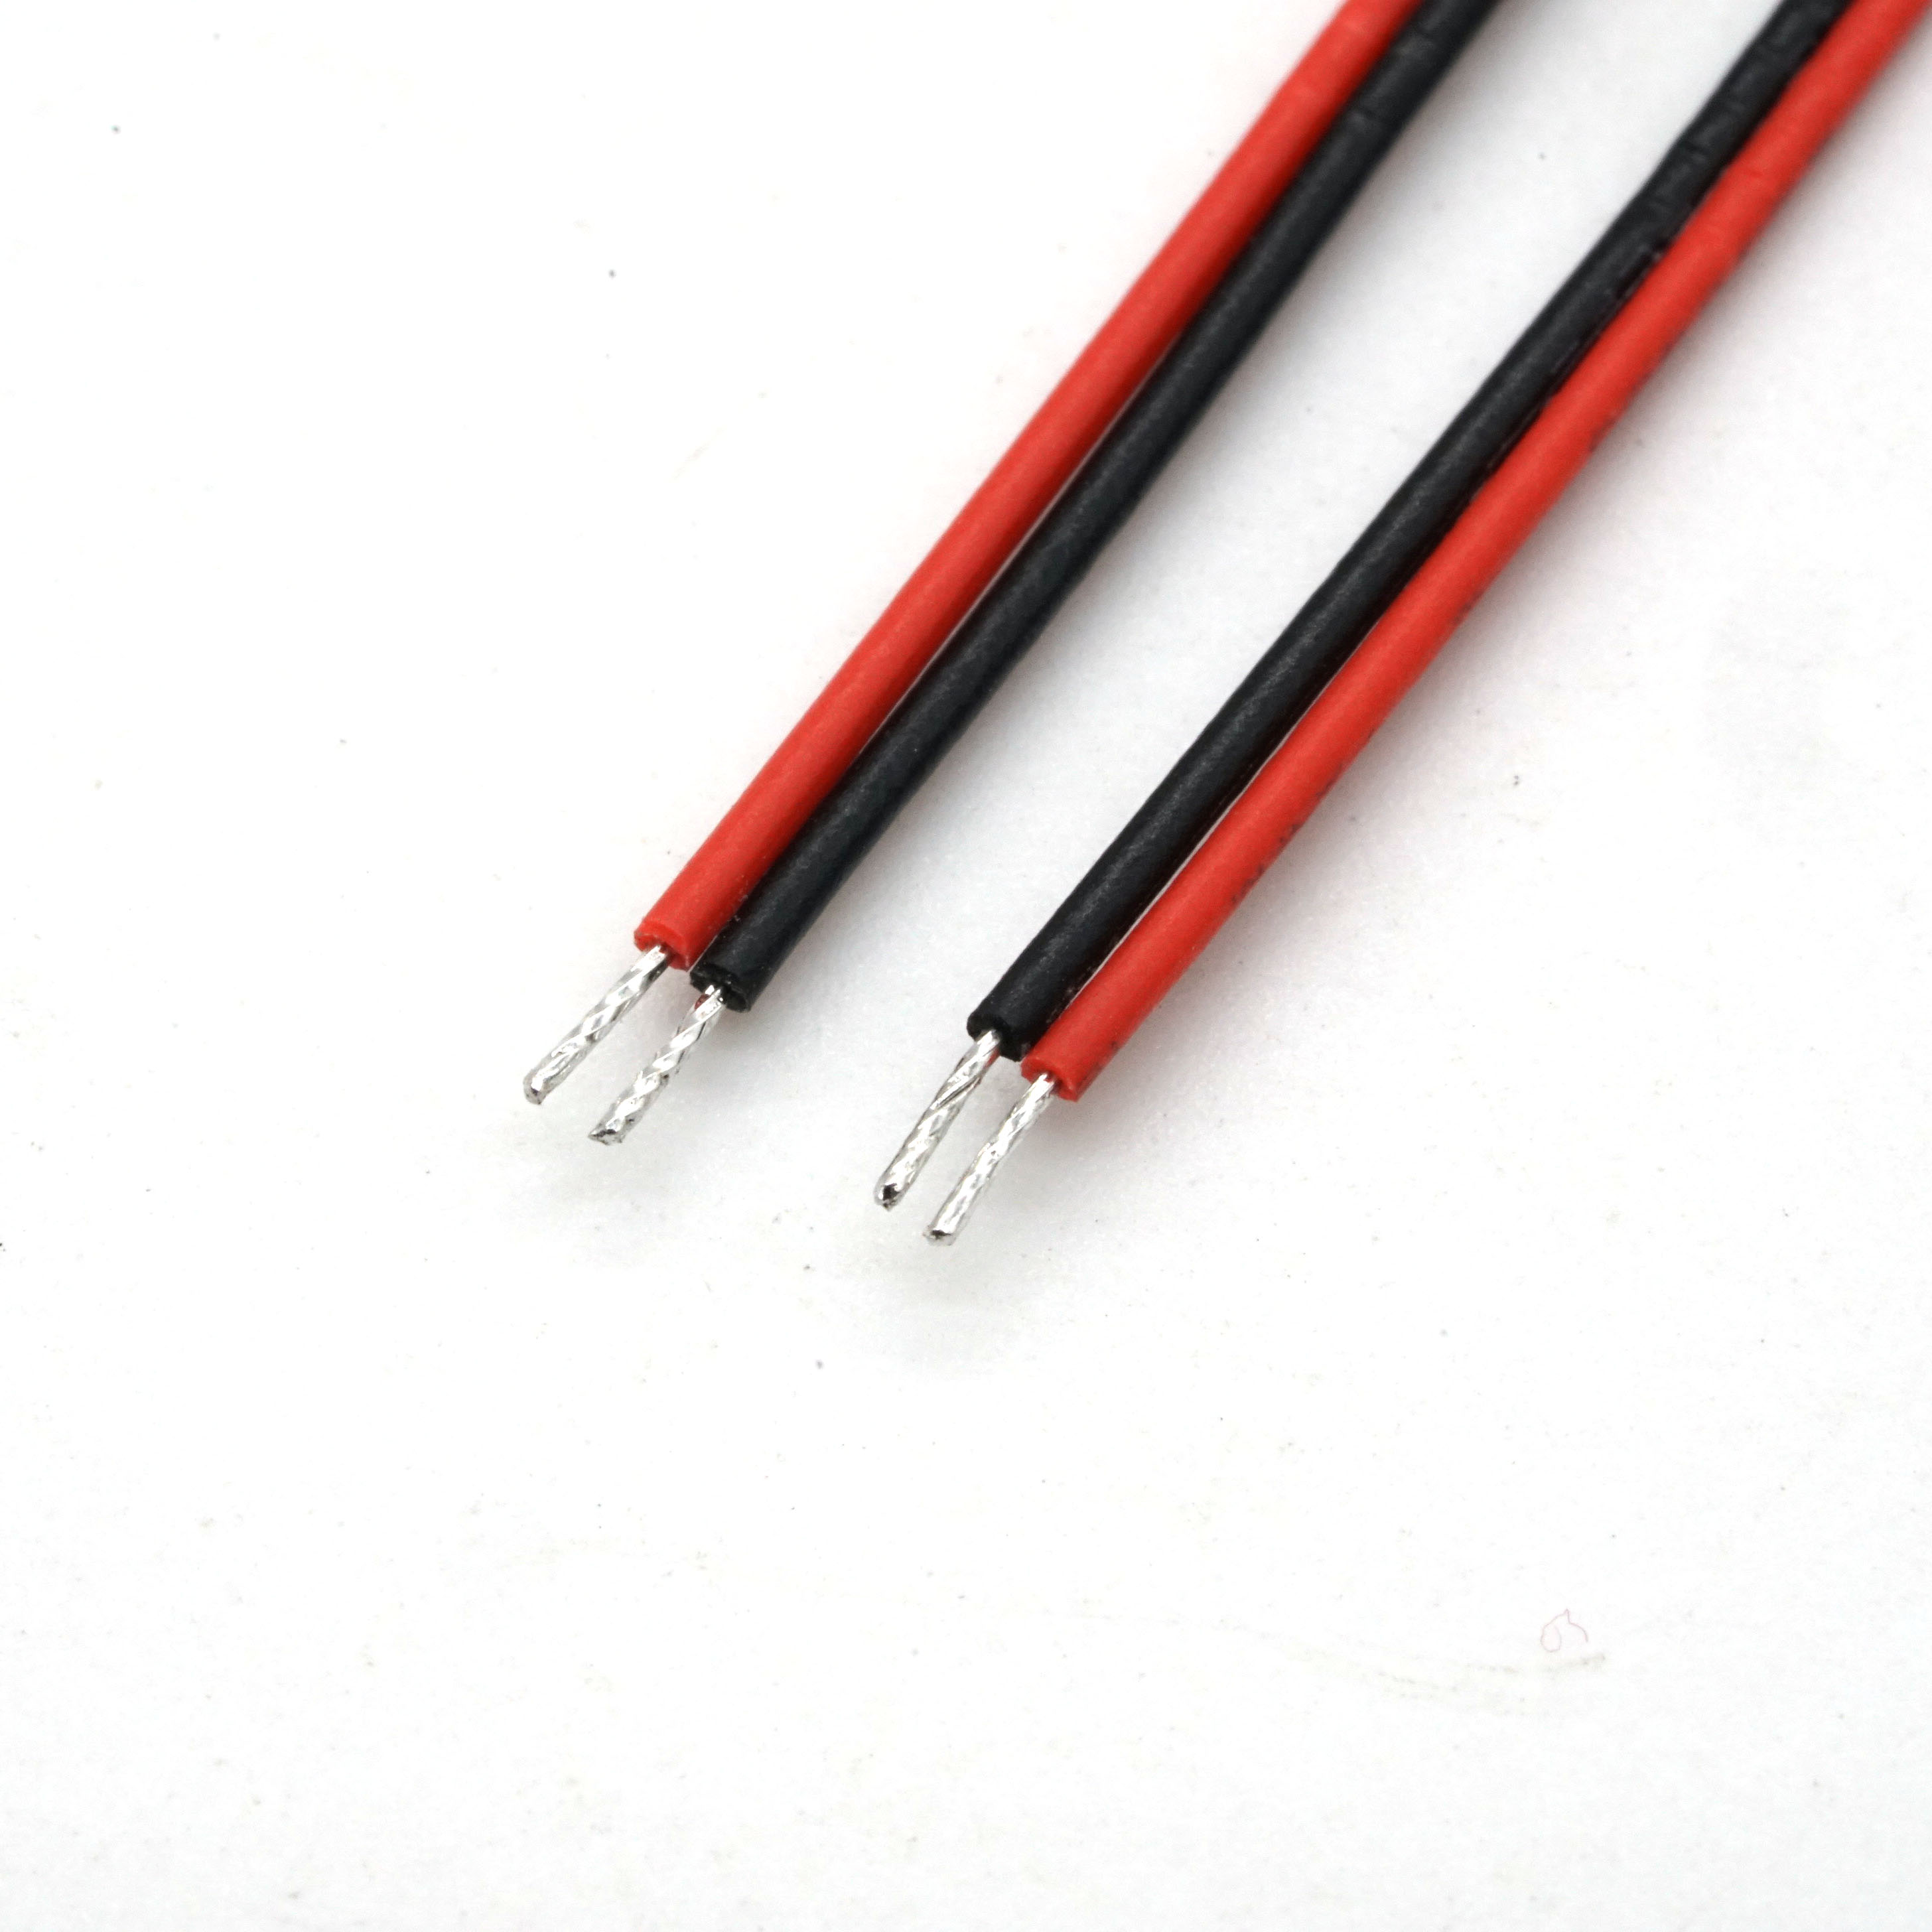 DF13 2Pin 1.25mm connector 1571 28AWG filum phaleras LVDS cables conventus electrica productorum